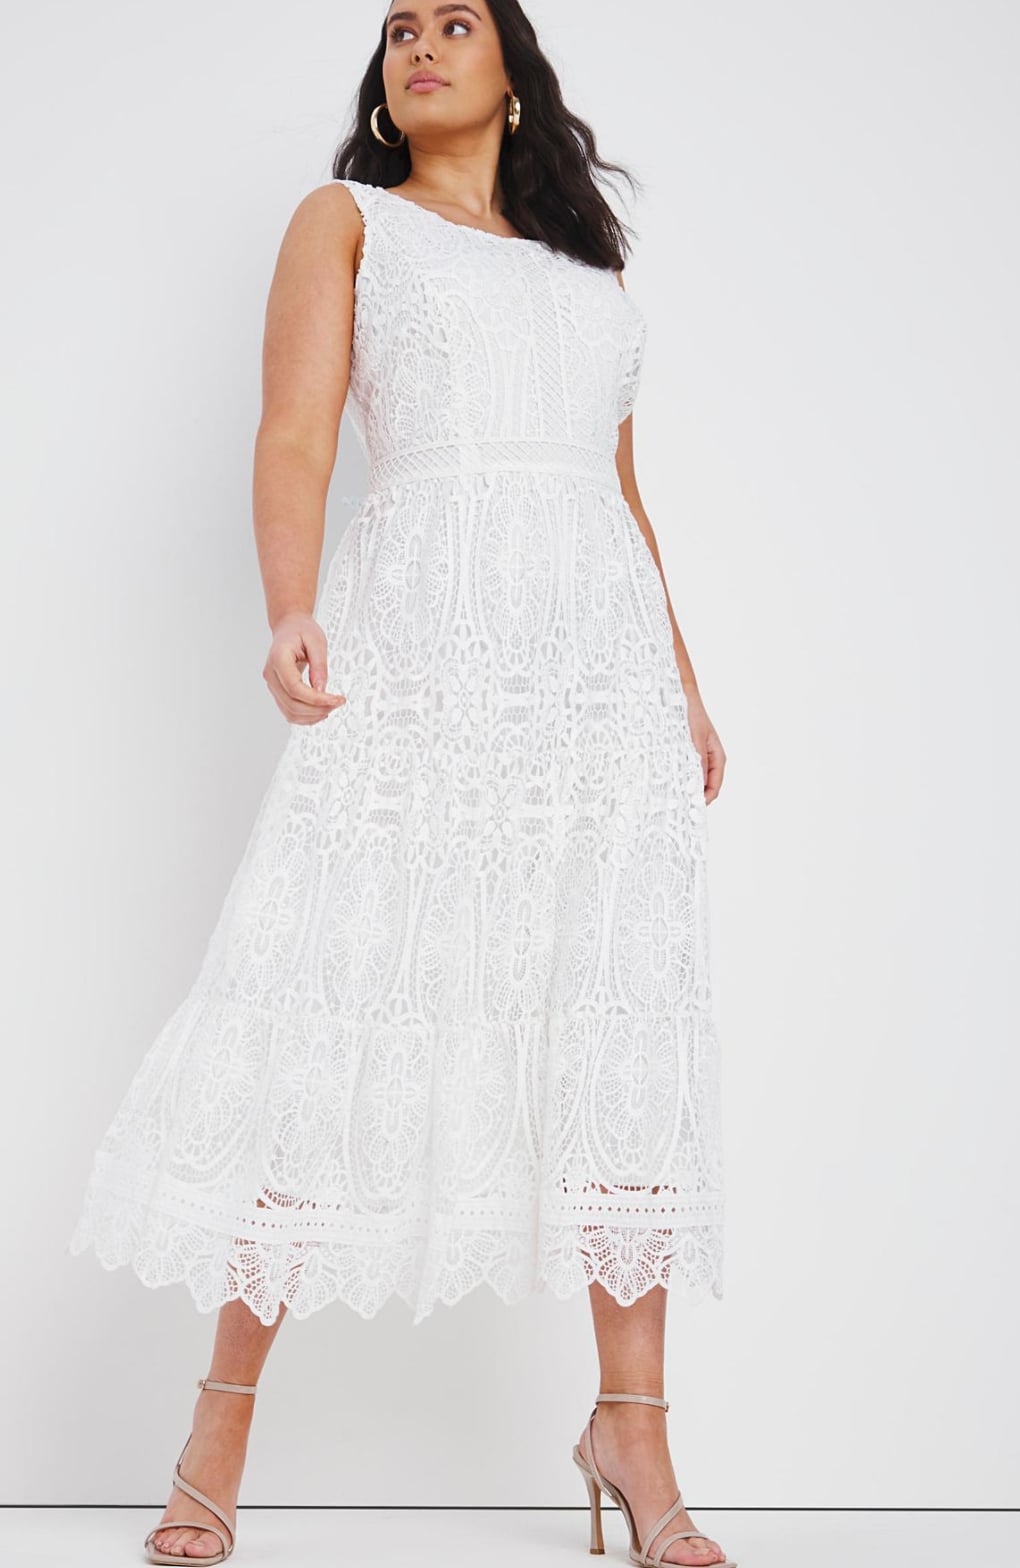 Simplybe Joanna Hope Linear Lace Prom Dress, 17 Gorgeous Yet Casual  Wedding Dresses For Your Intimate Summer Ceremony